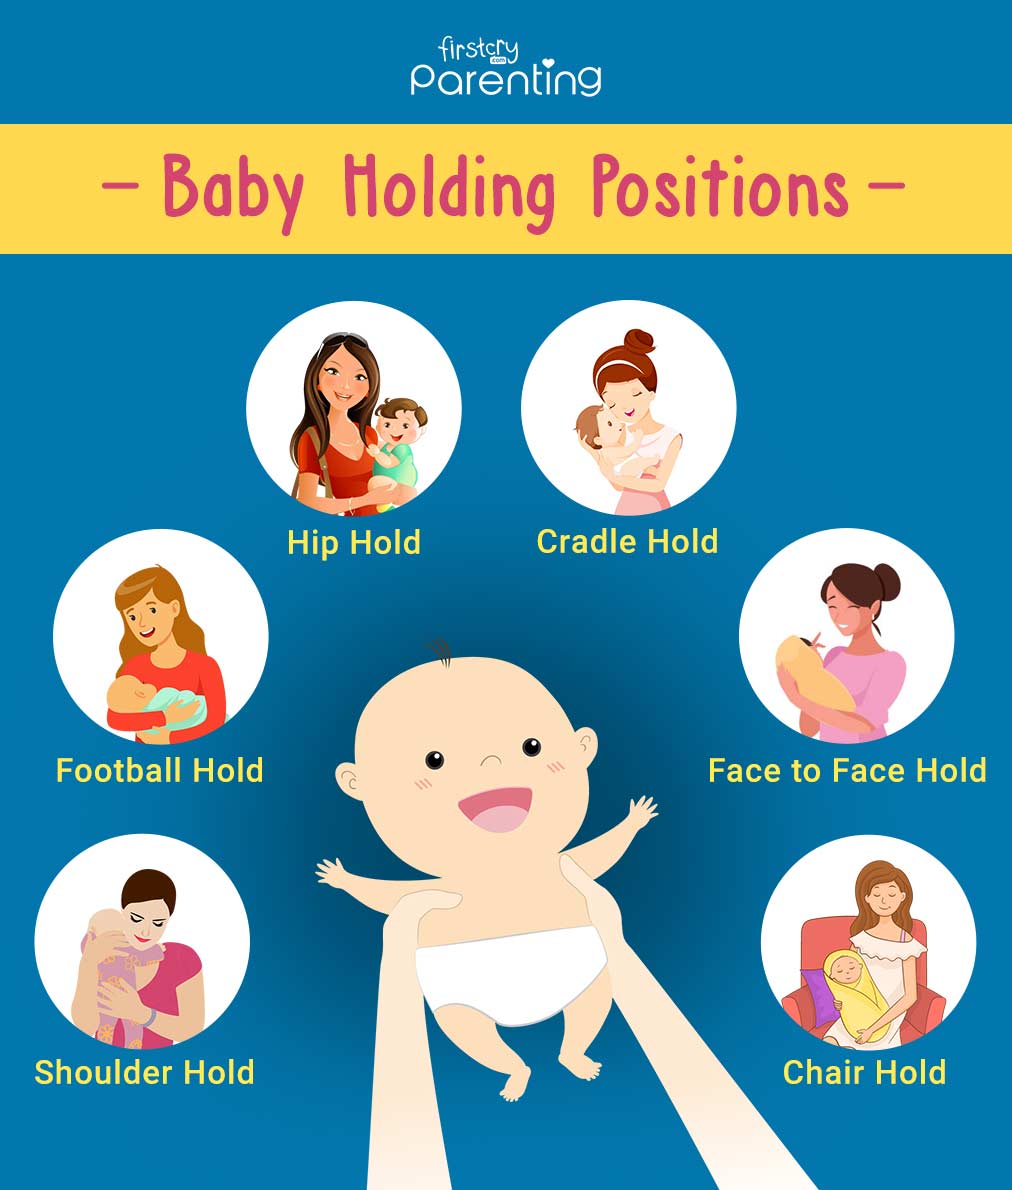 6 Safe Baby Holding Positions